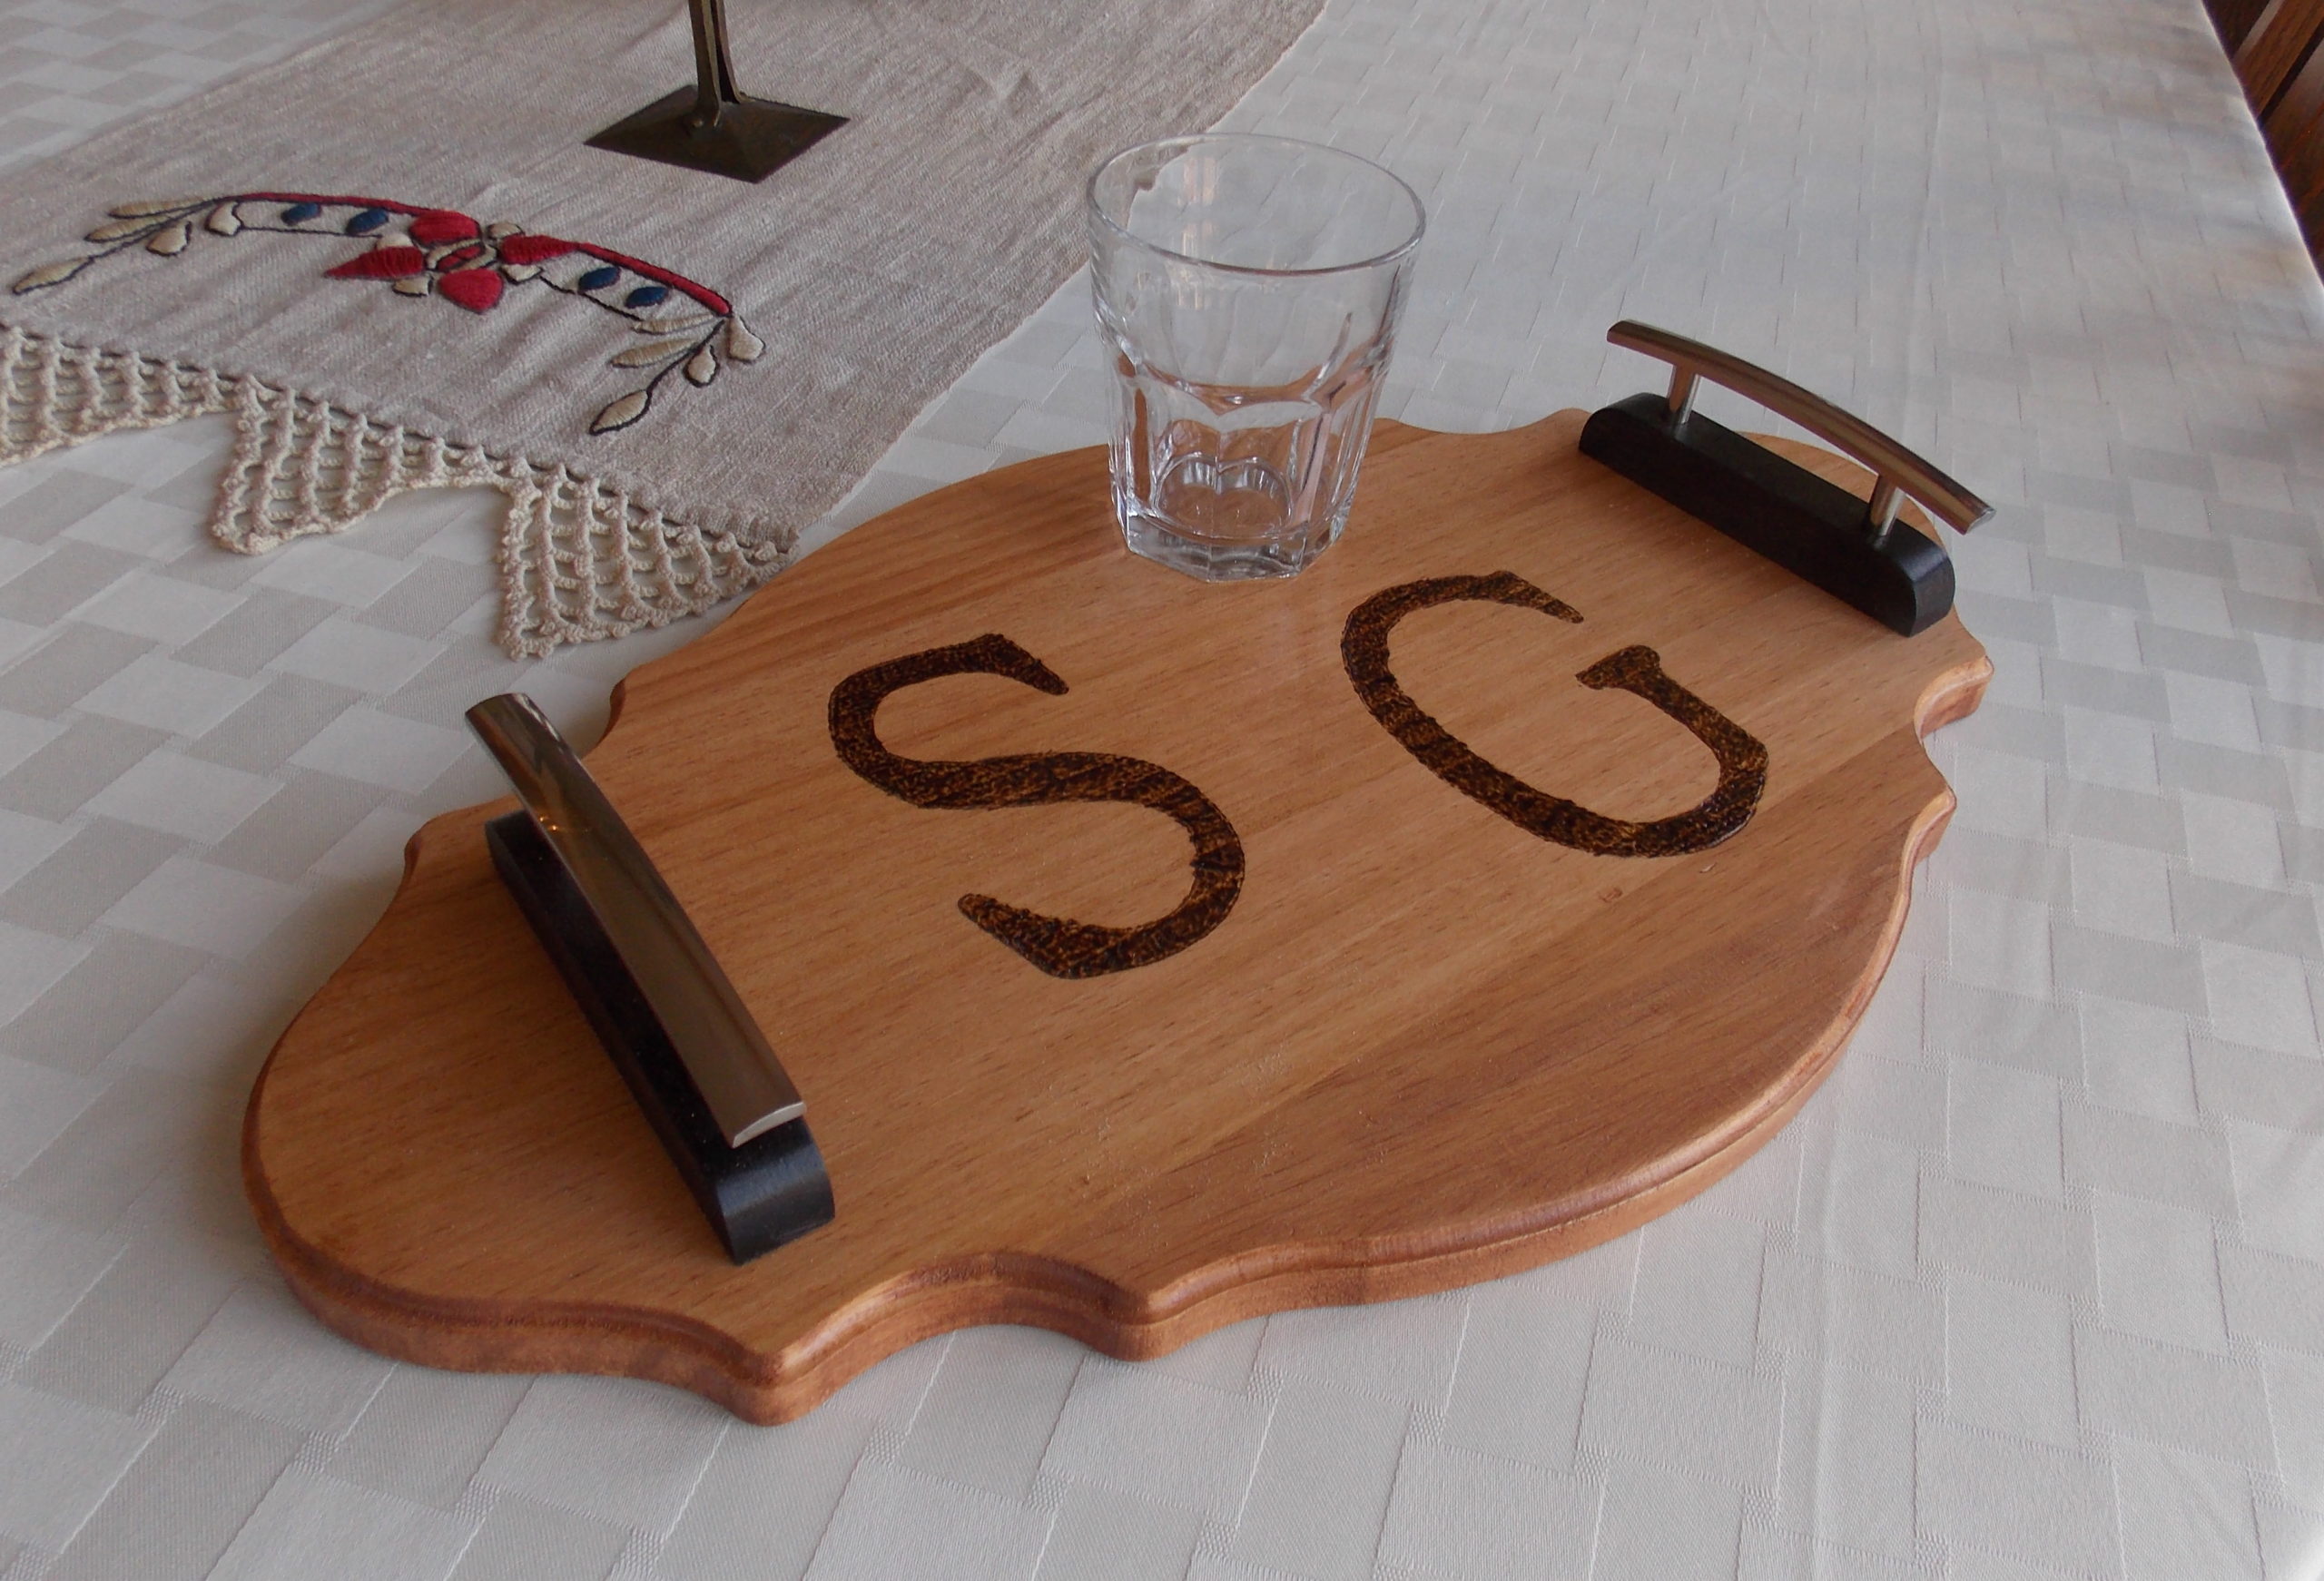 Glass on top of monogrammed wood tray with side handles